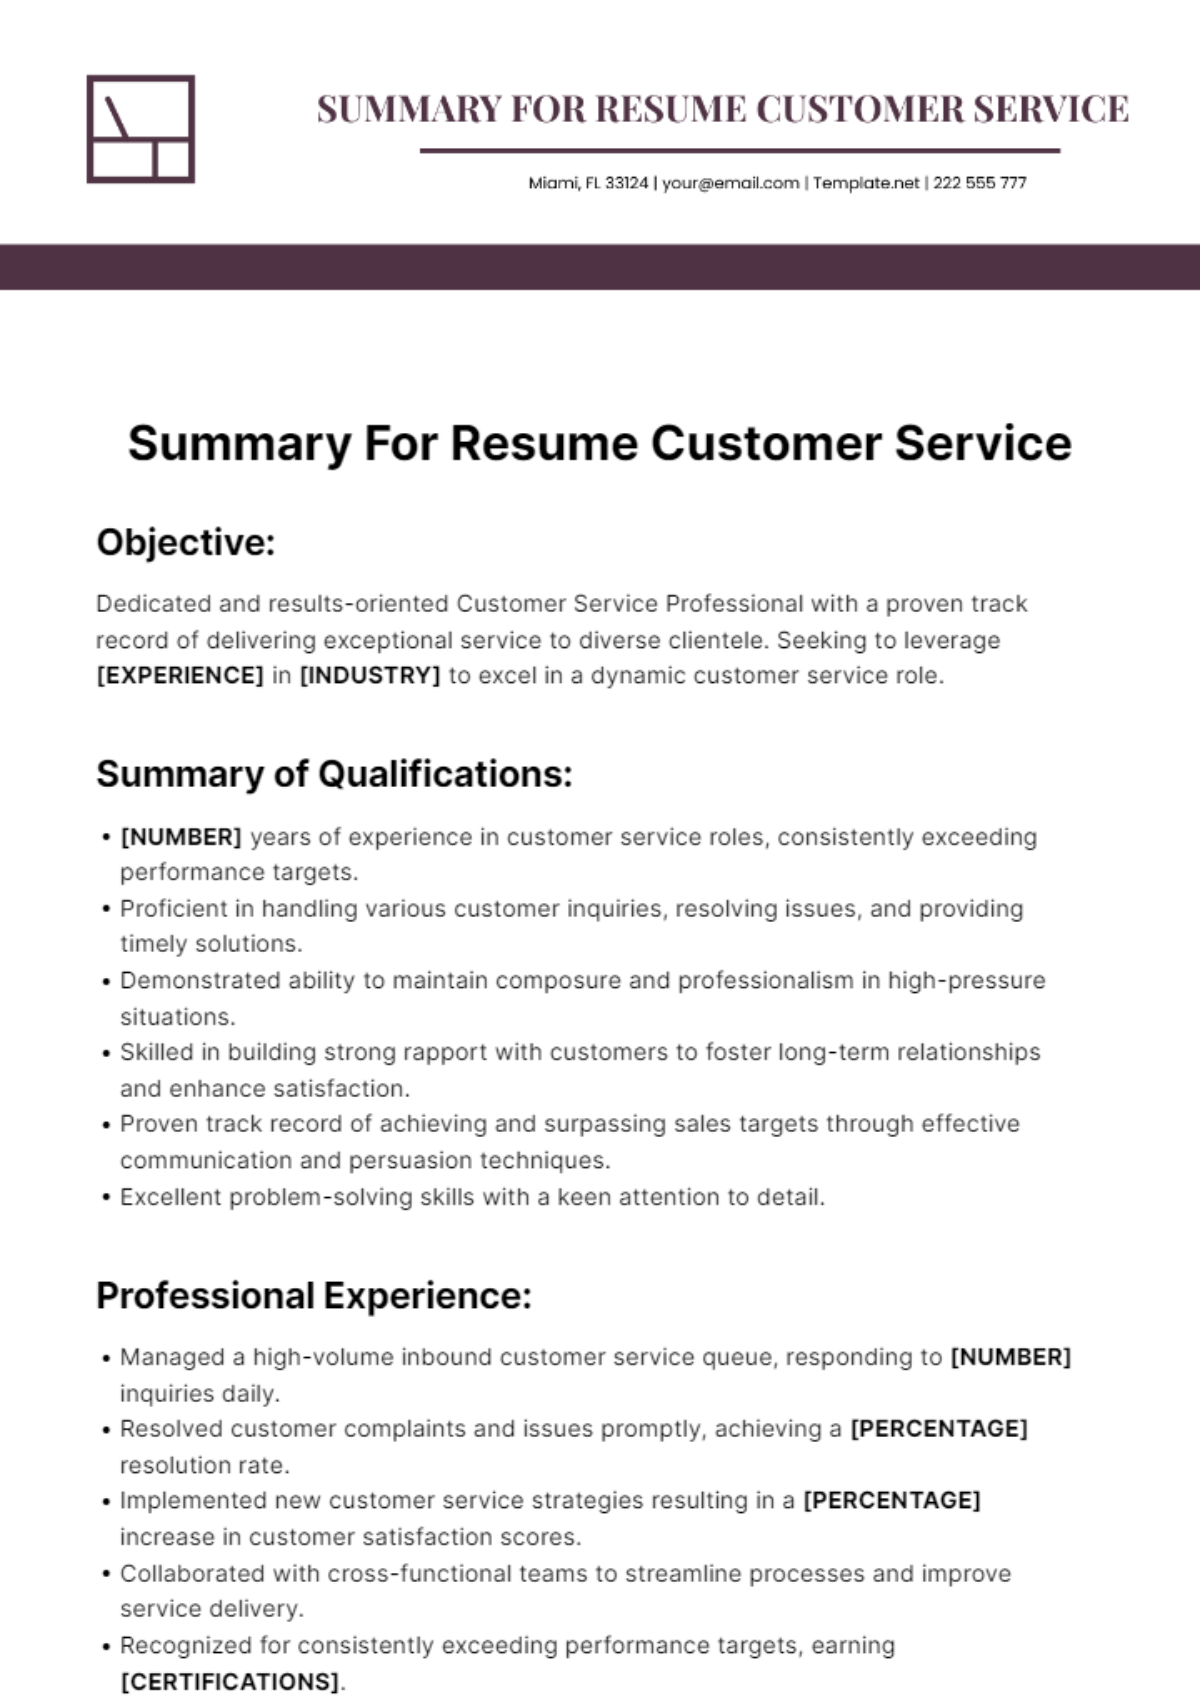 Summary For Resume Customer Service Template